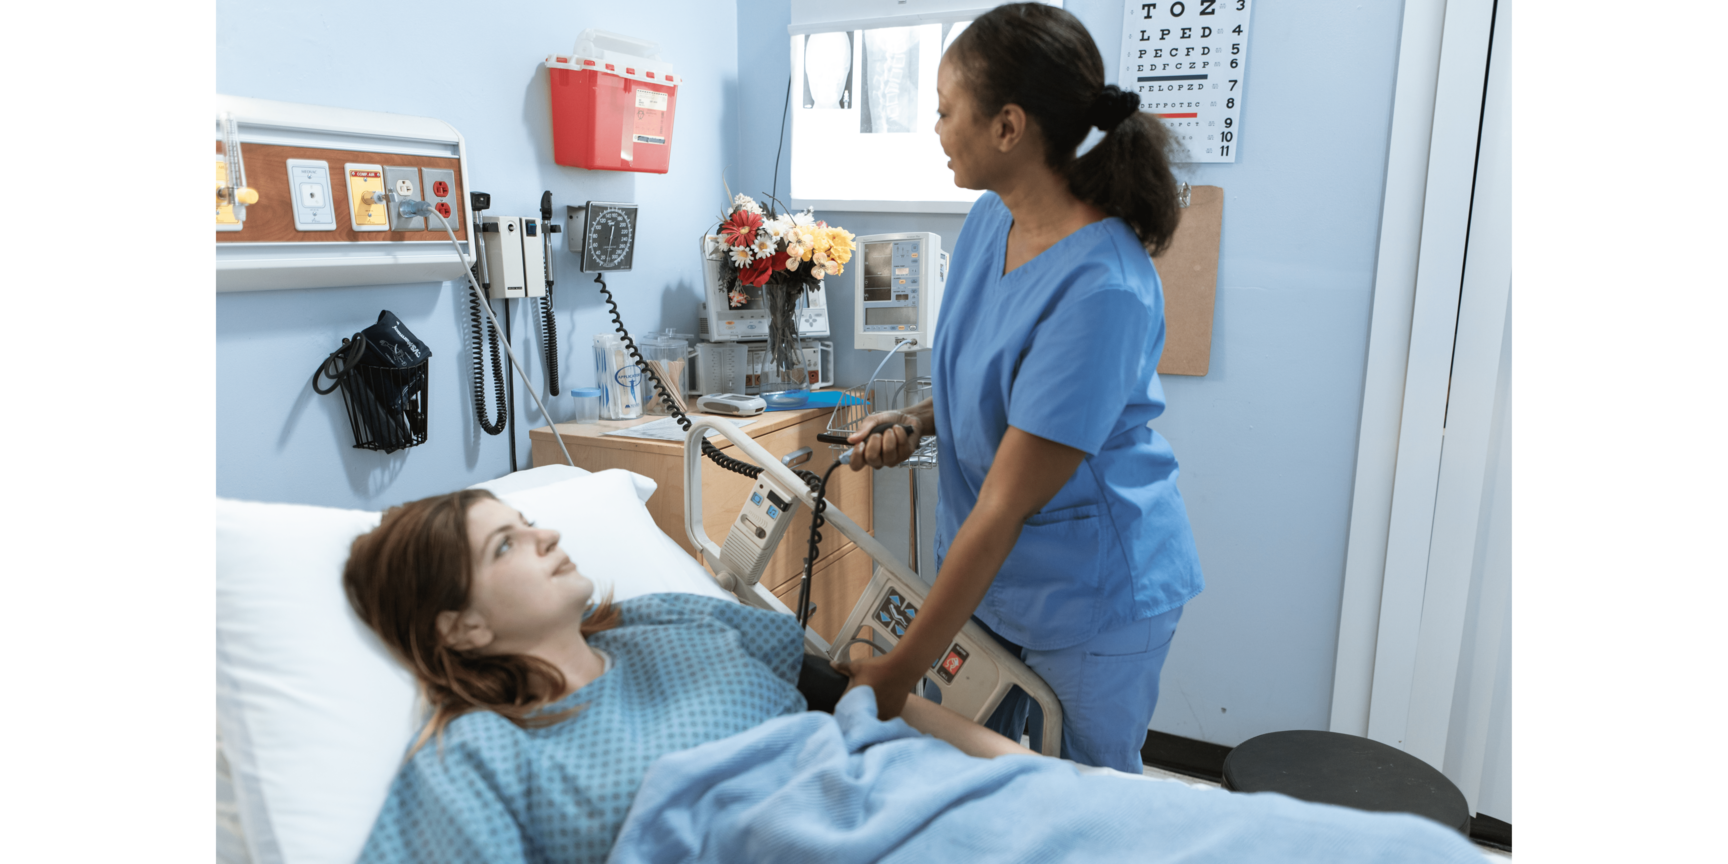 Learn and Practice Core Basic patient observations for Hospital Setting